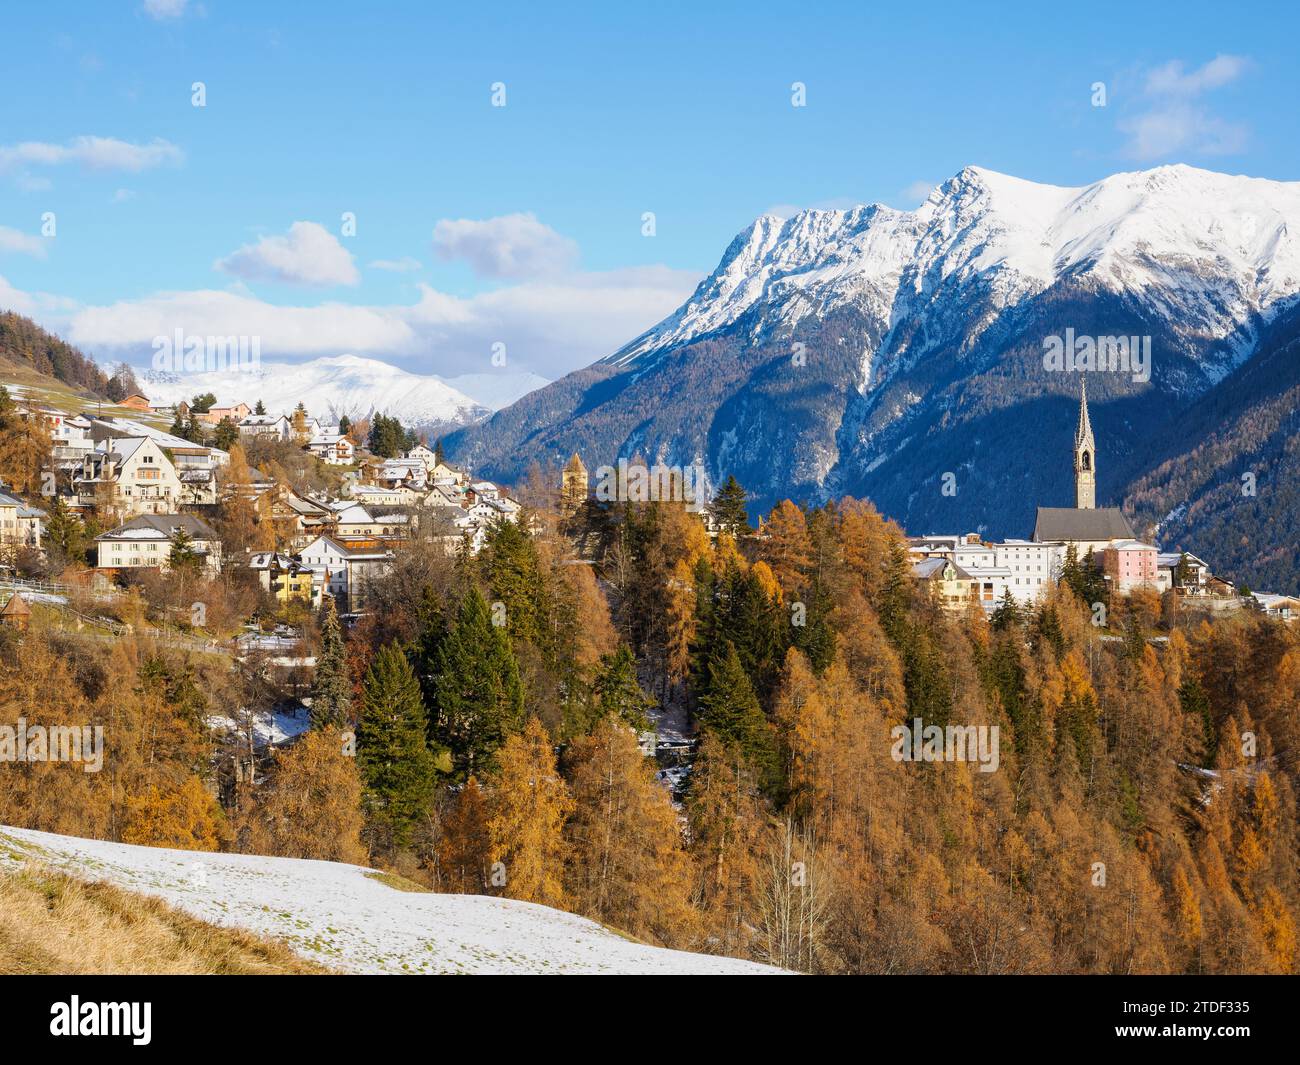 The village of Sent and autumn color in the Lower Engadine Valley, Sent, Graubunden, Switzerland, Europe Stock Photo